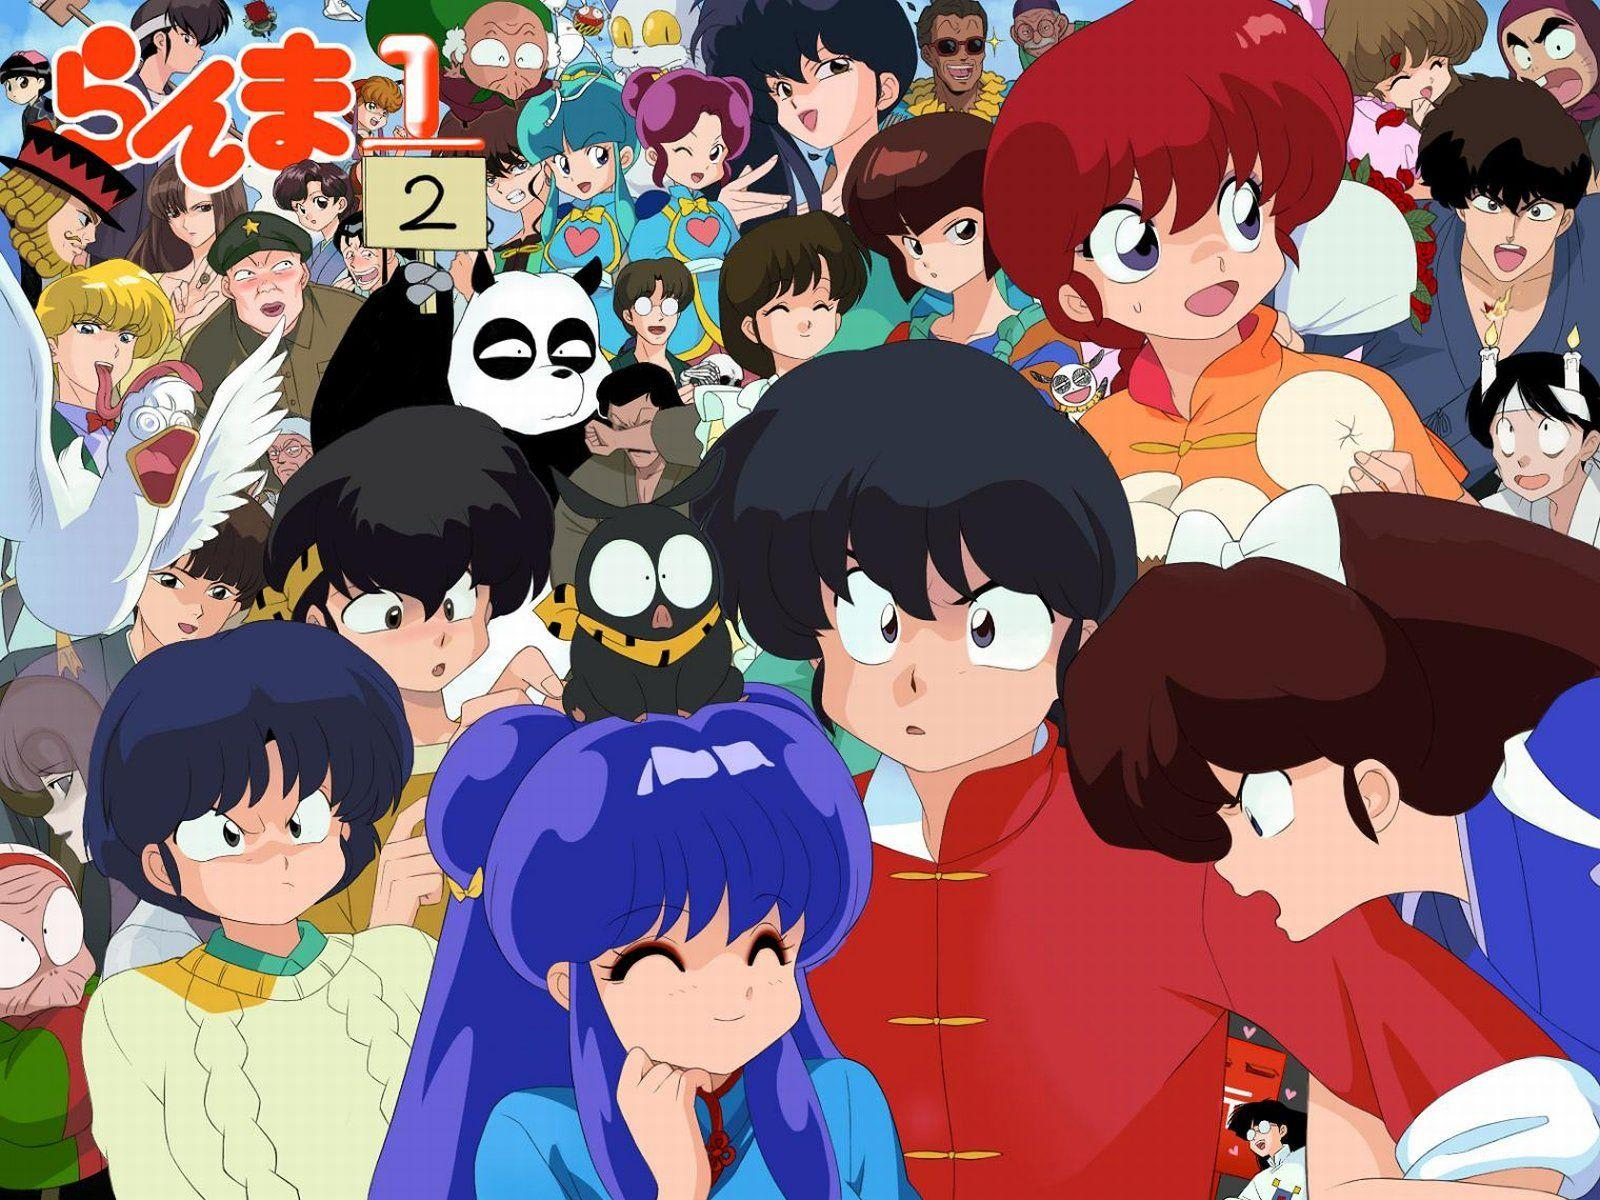 Japanese Nostalgia (or, How Ranma 1/2 is the Only Thing Keeping Me Sane Right Now)